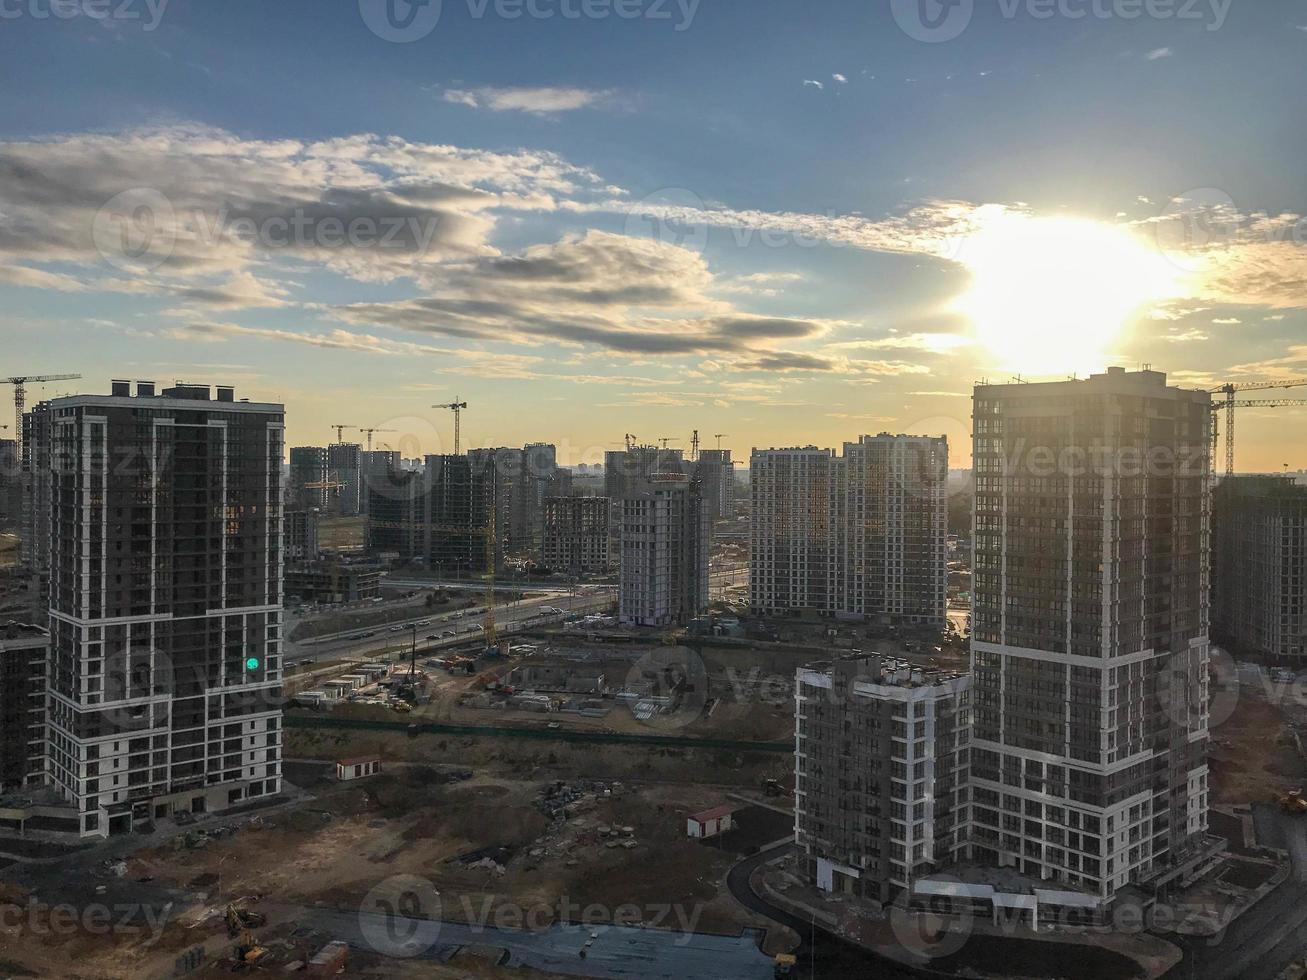 a new neighborhood in the city. shooting from a height. urban urban landscape. tall glass multi-storey buildings of different colors and different heights. against the background of the sun photo